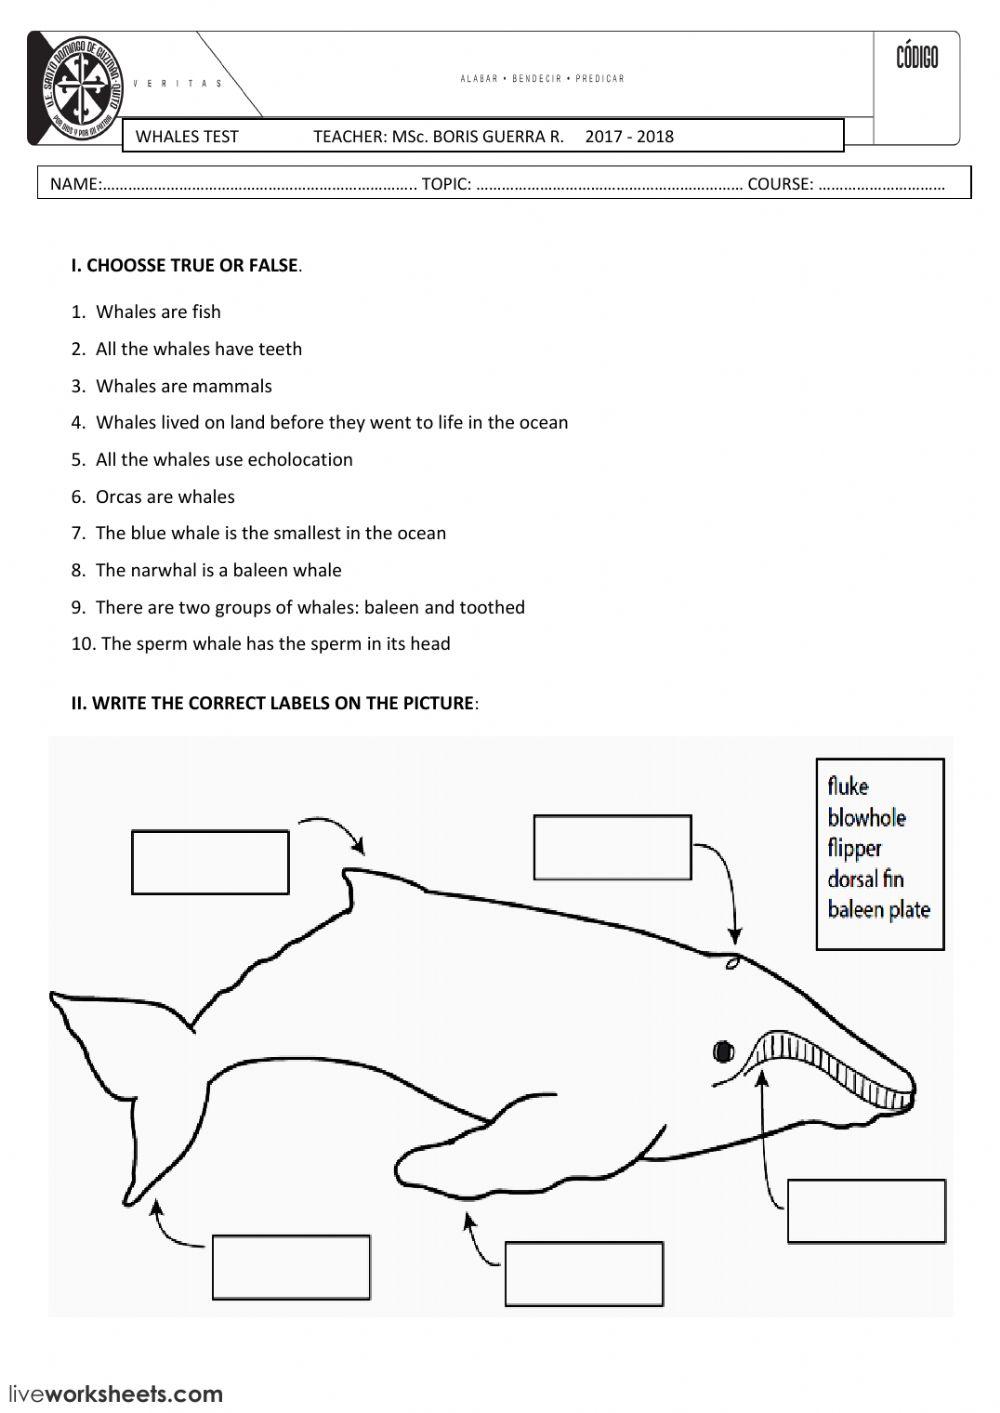 WHALES TEST